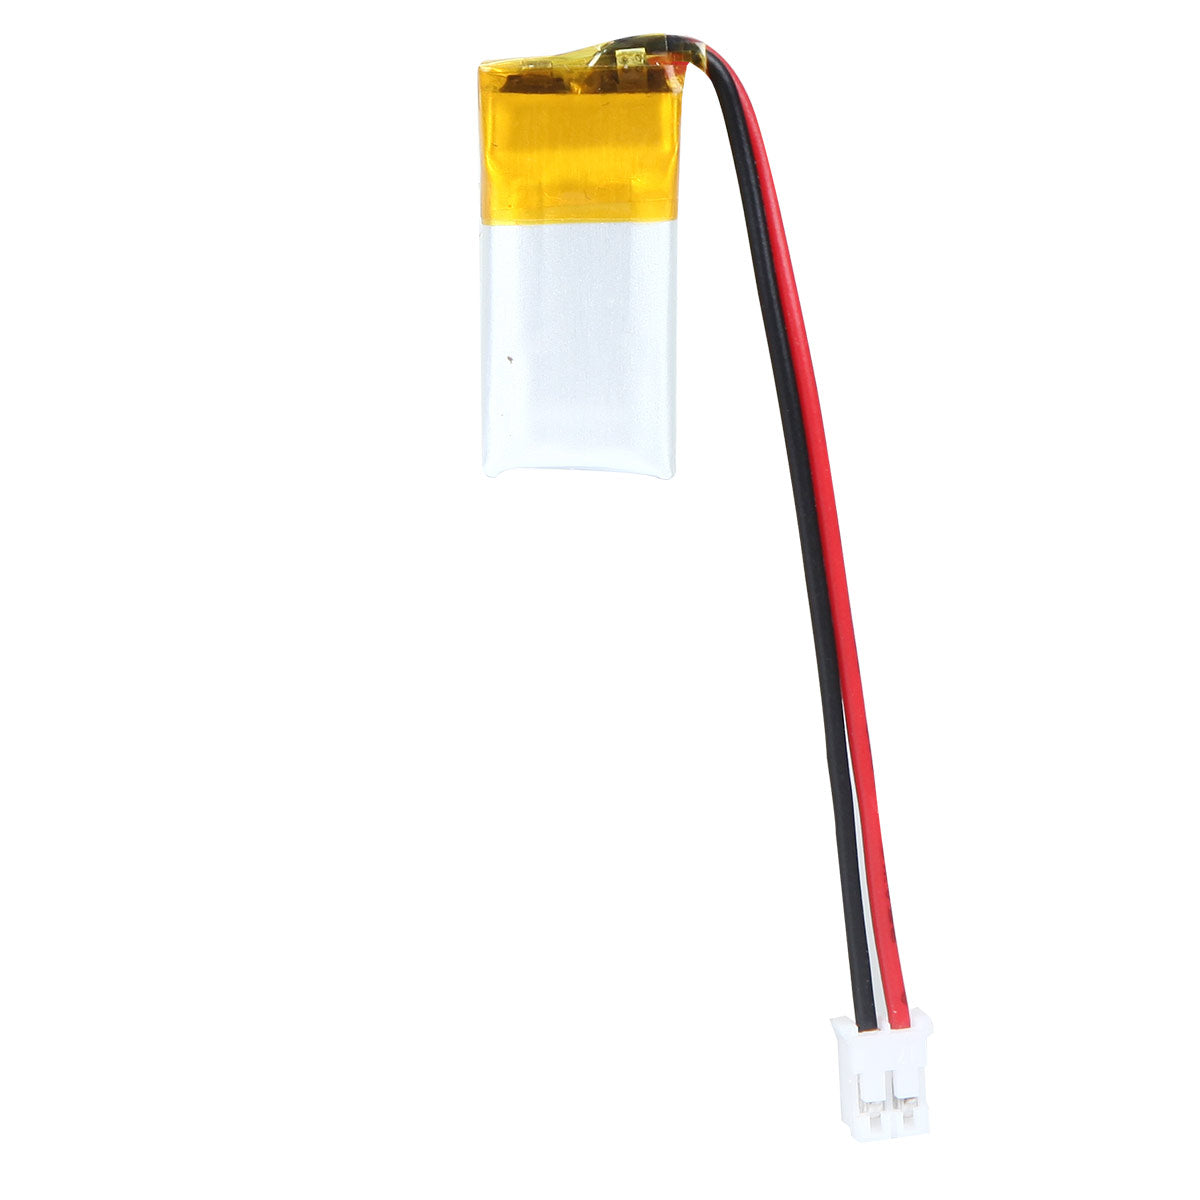 YDL 3.7V 40mAh 301020/301120 RechargeableLithium Polymer Battery Length 22mm